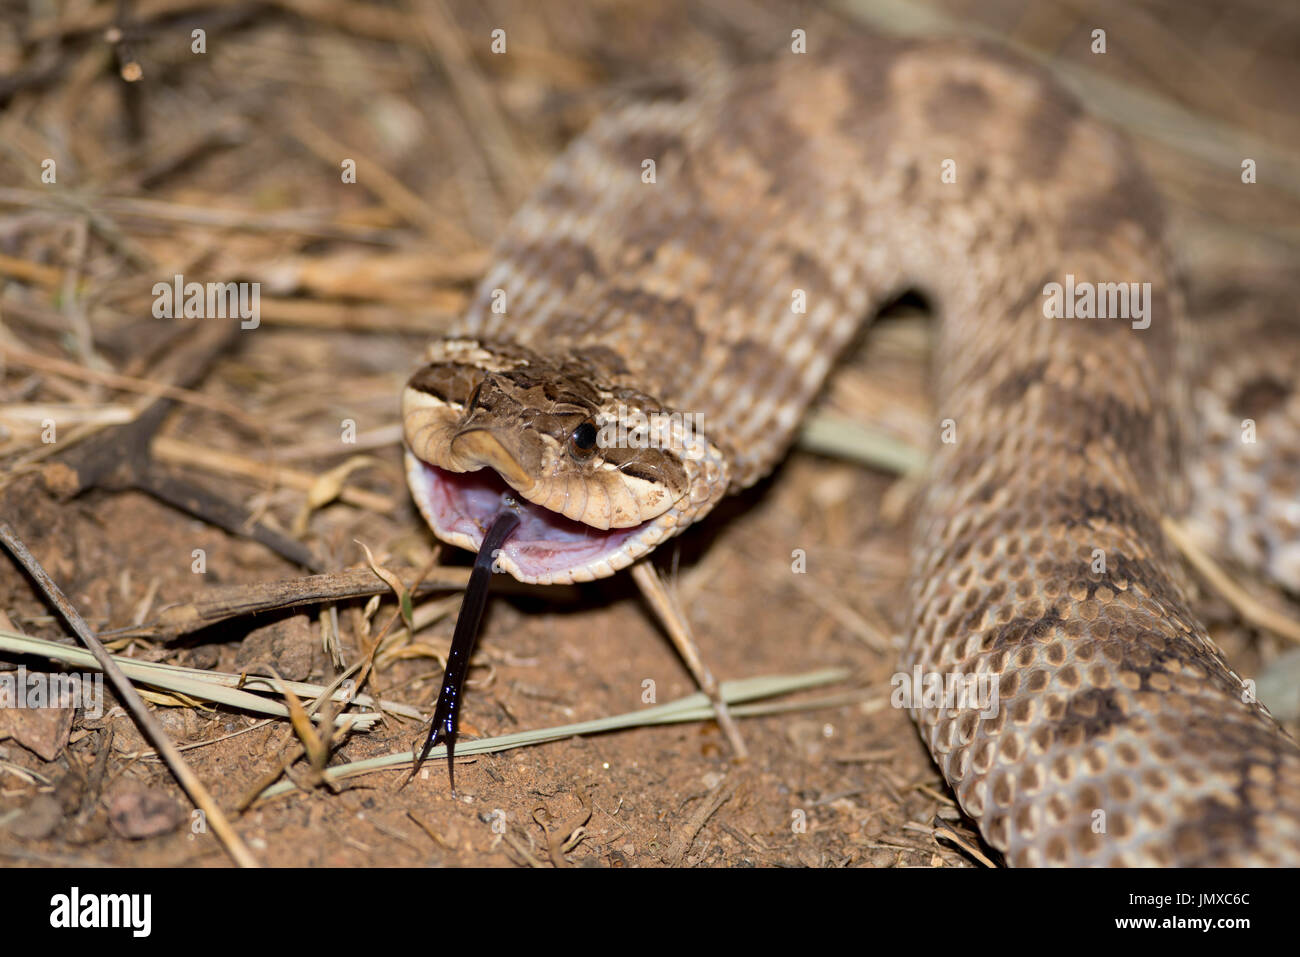 #mexican hog-nosed snake #defensive #wildlife #new mexico #mimicry Stock Photo